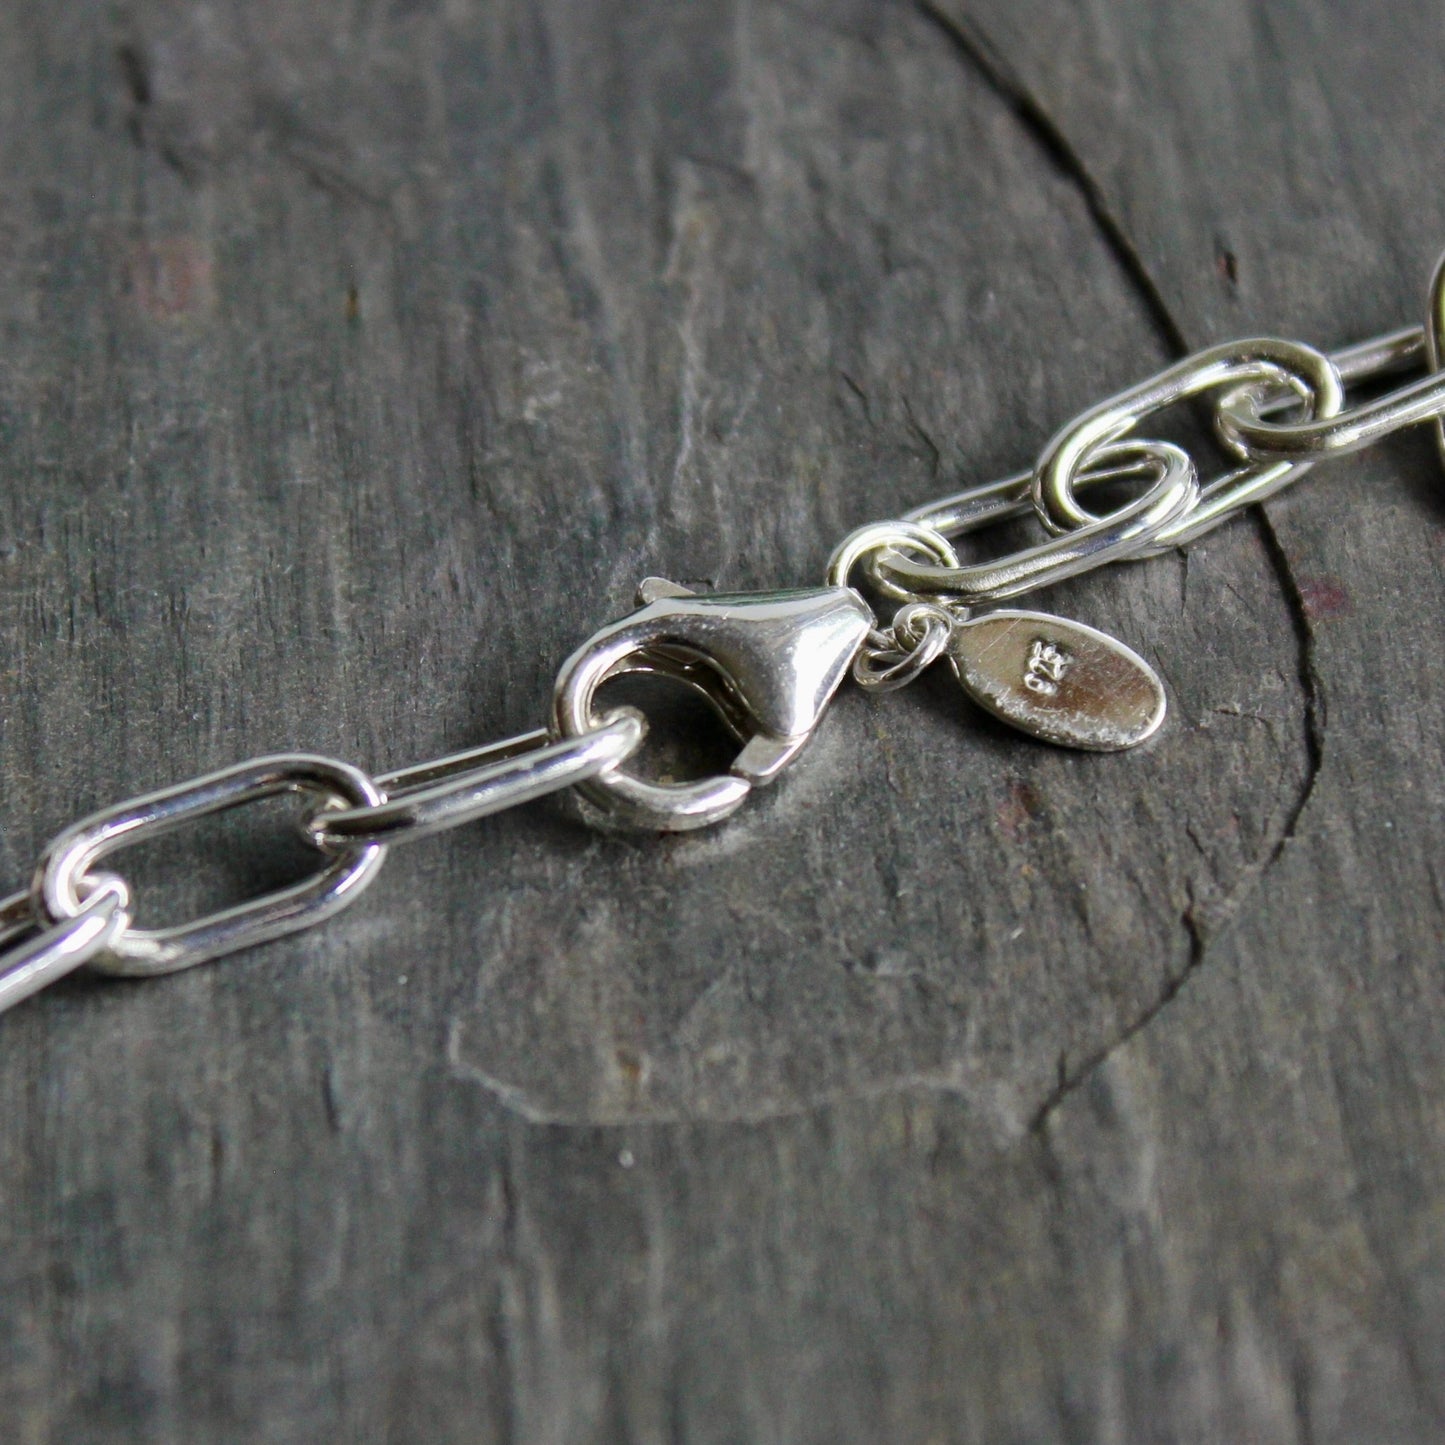 This necklace has medium weight oval sterling silver links that have been handcrafted by Will Macy in Corvallis, OR. 